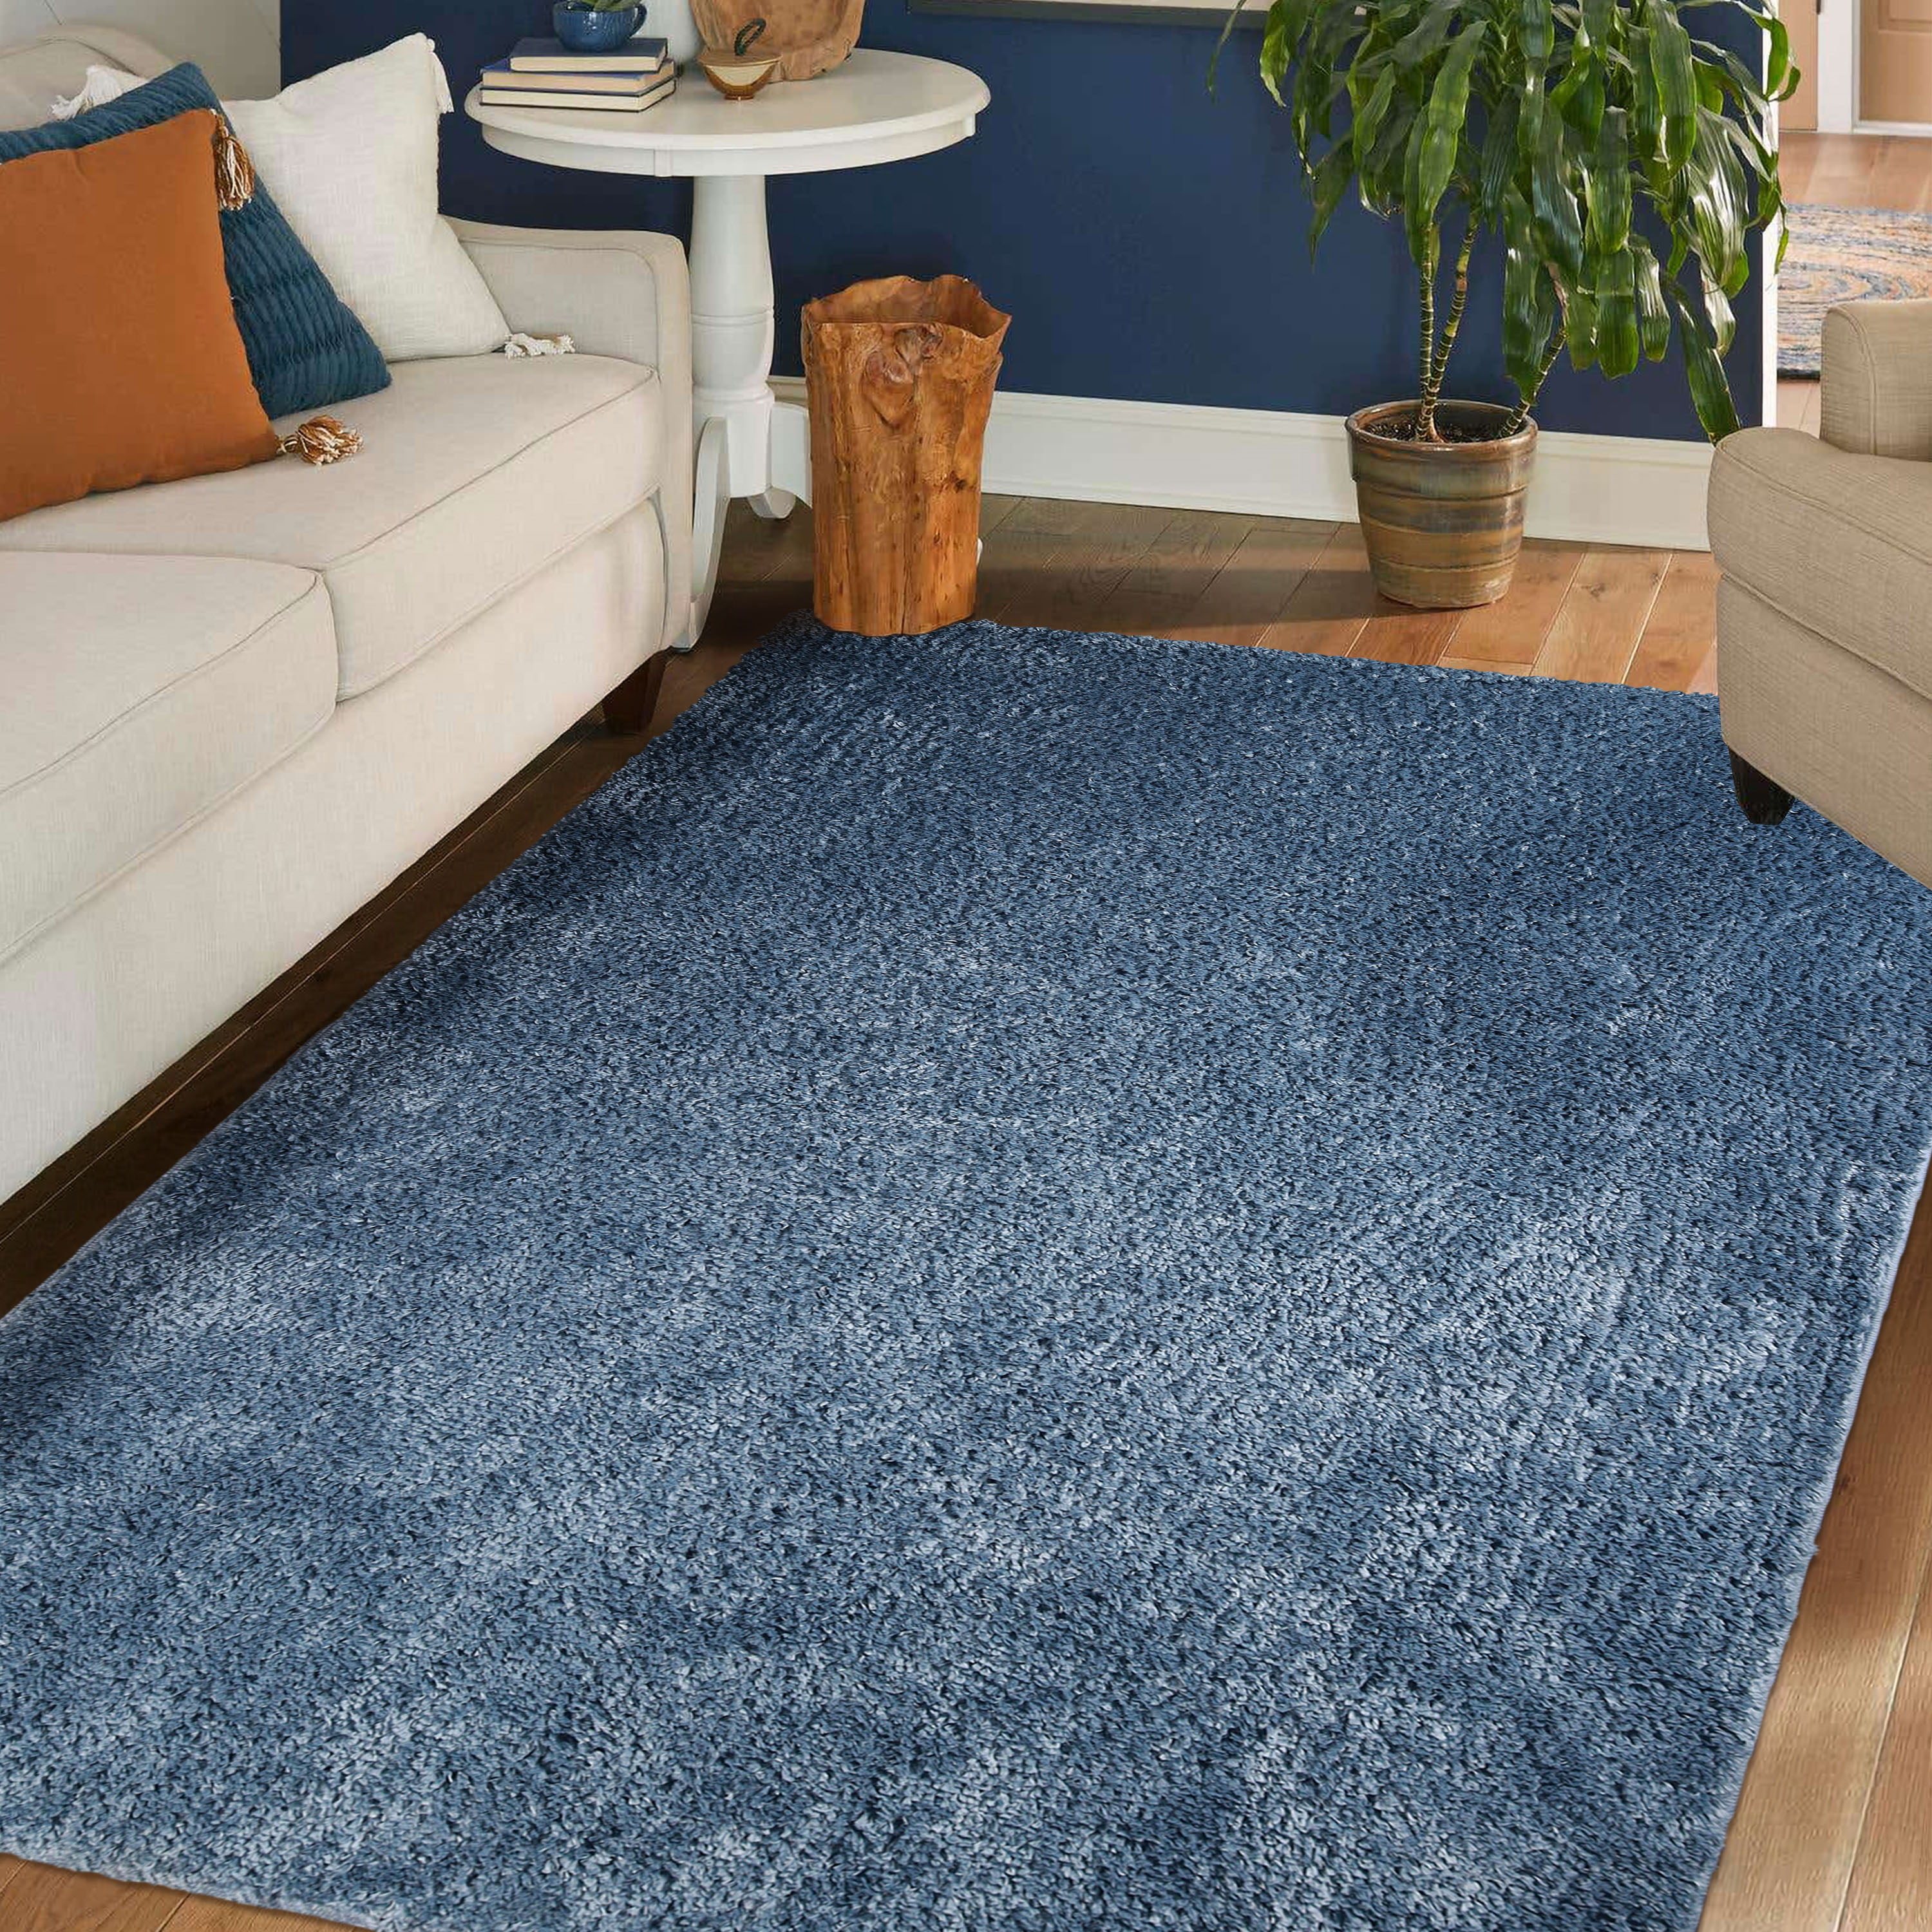 AREA RUGS SHAGGY AMERICAN COVER DESIGN  FLASH SHAGGY BLUE 3 BY 8 RUNNER 